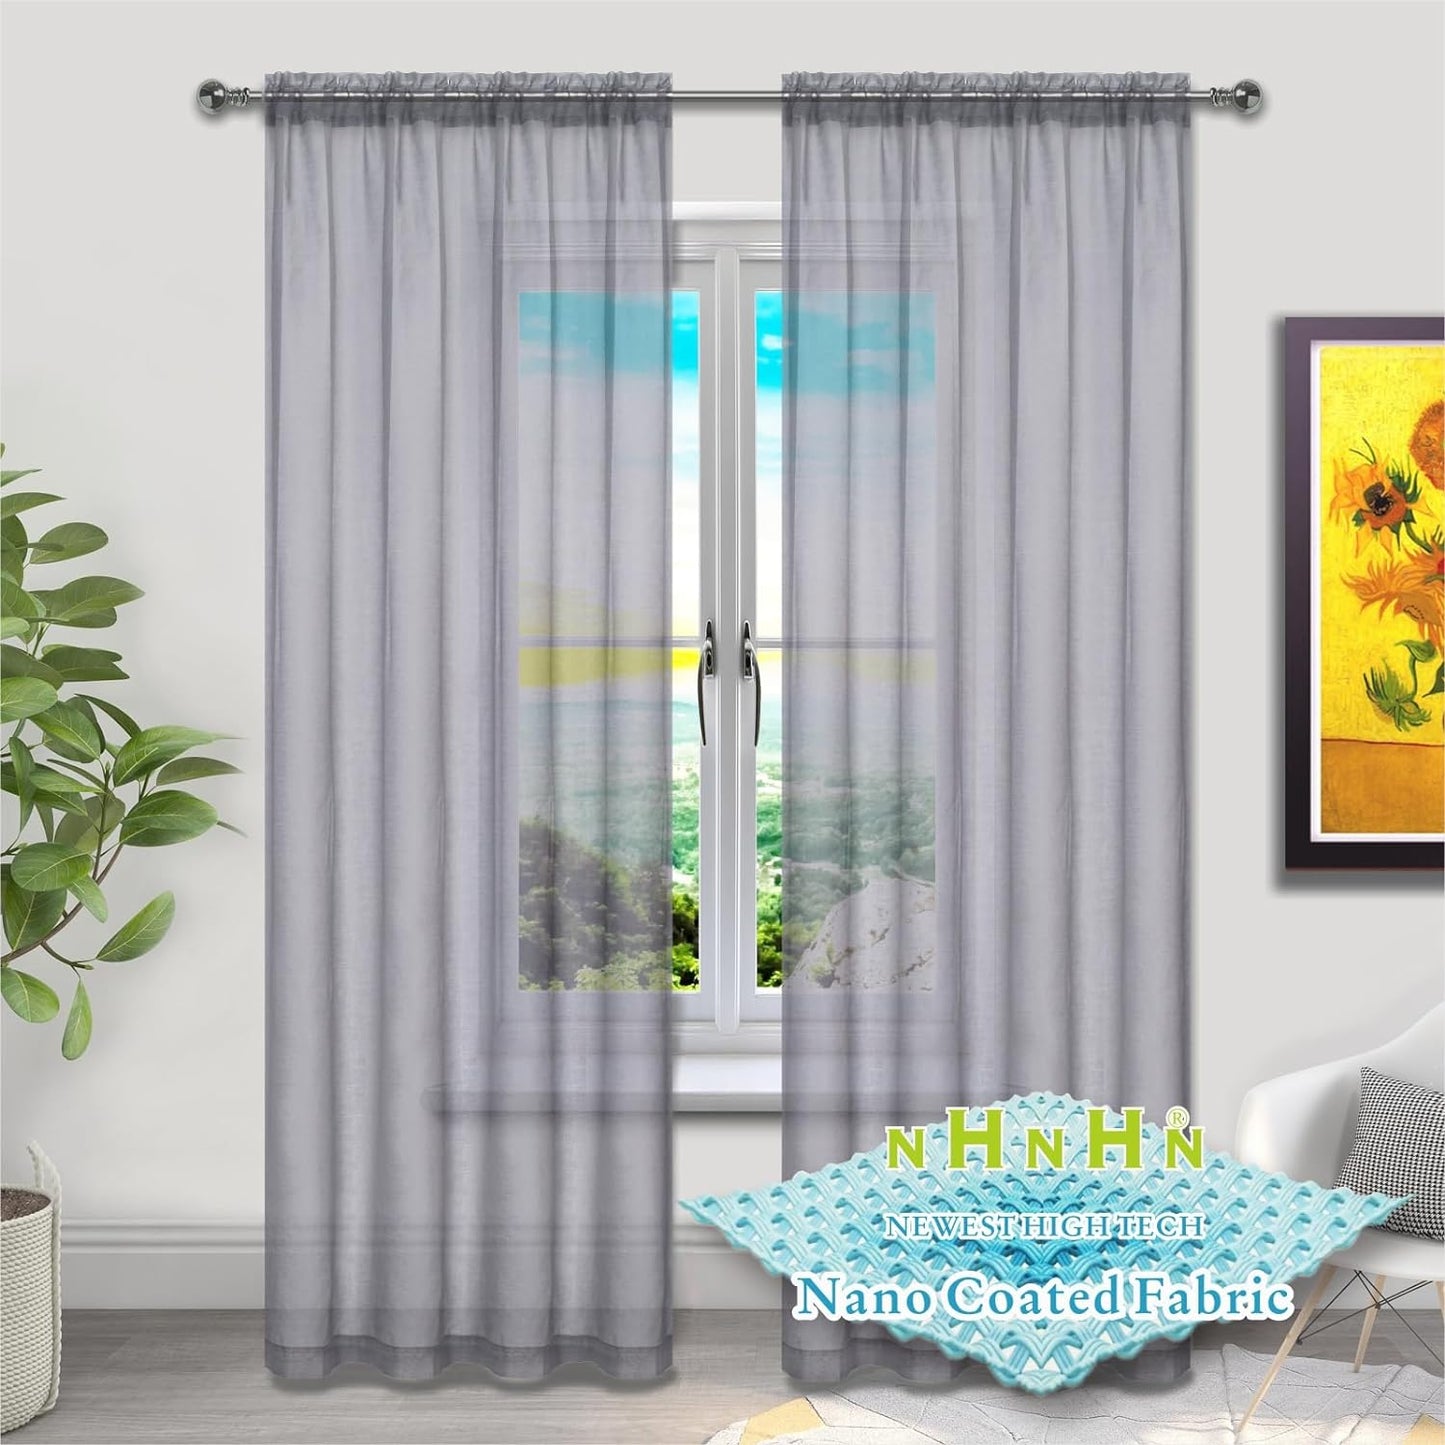 Nano Material Coated White Sheer Curtains 72 Inches Long, Rod Pocket Window Drapes Voile Sheer Curtain 2 Panels for Living Room Bedroom Kitchen (White, W52 X L72)  NHNHN Grey 52W X 72L | 2 Panels 